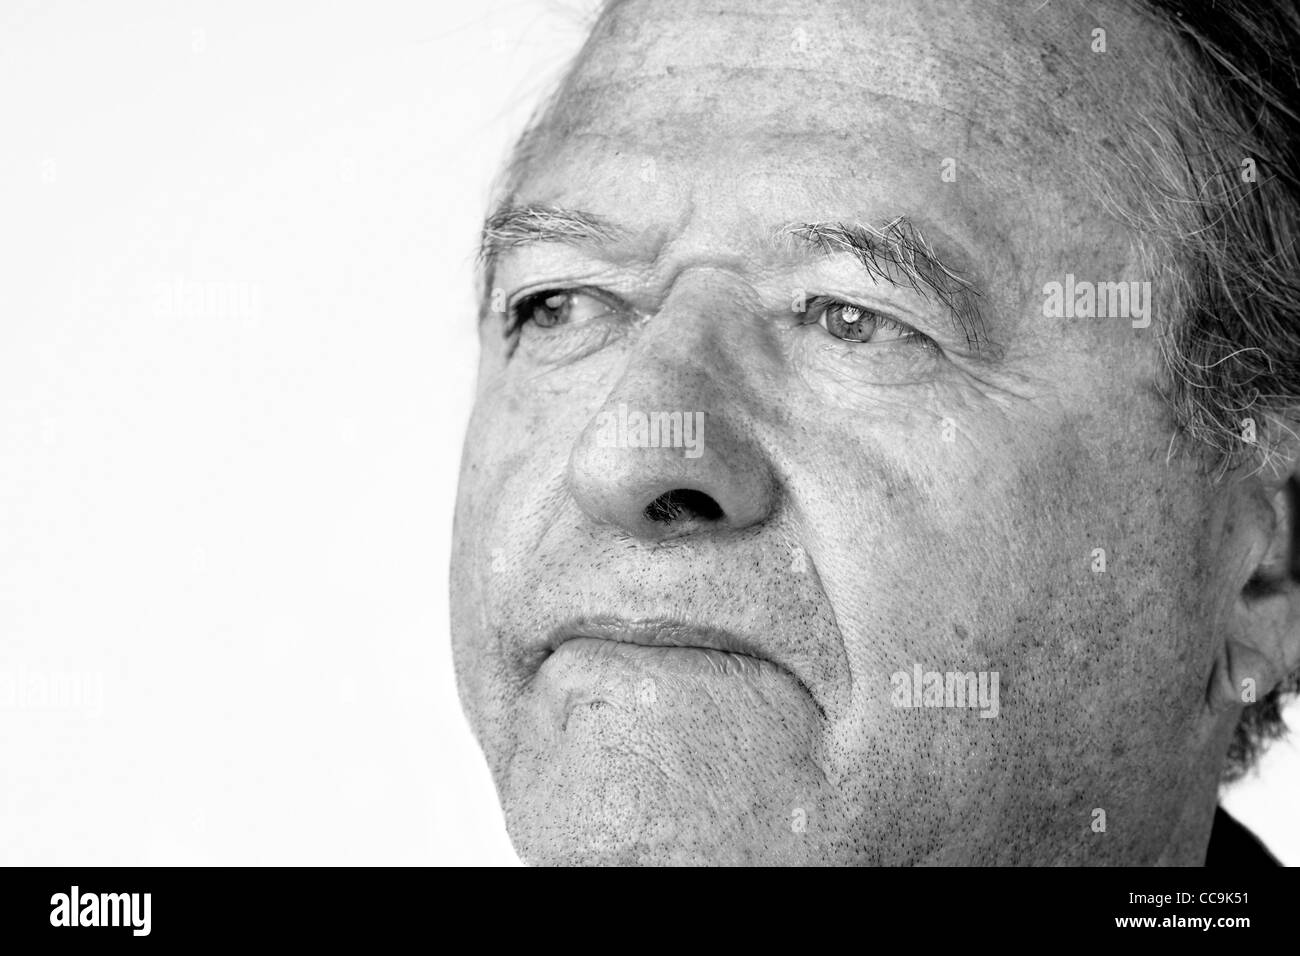 Black and white portrait of a senior man with pale eyes looking away with hint of a smile, great facial details, over white. Stock Photo